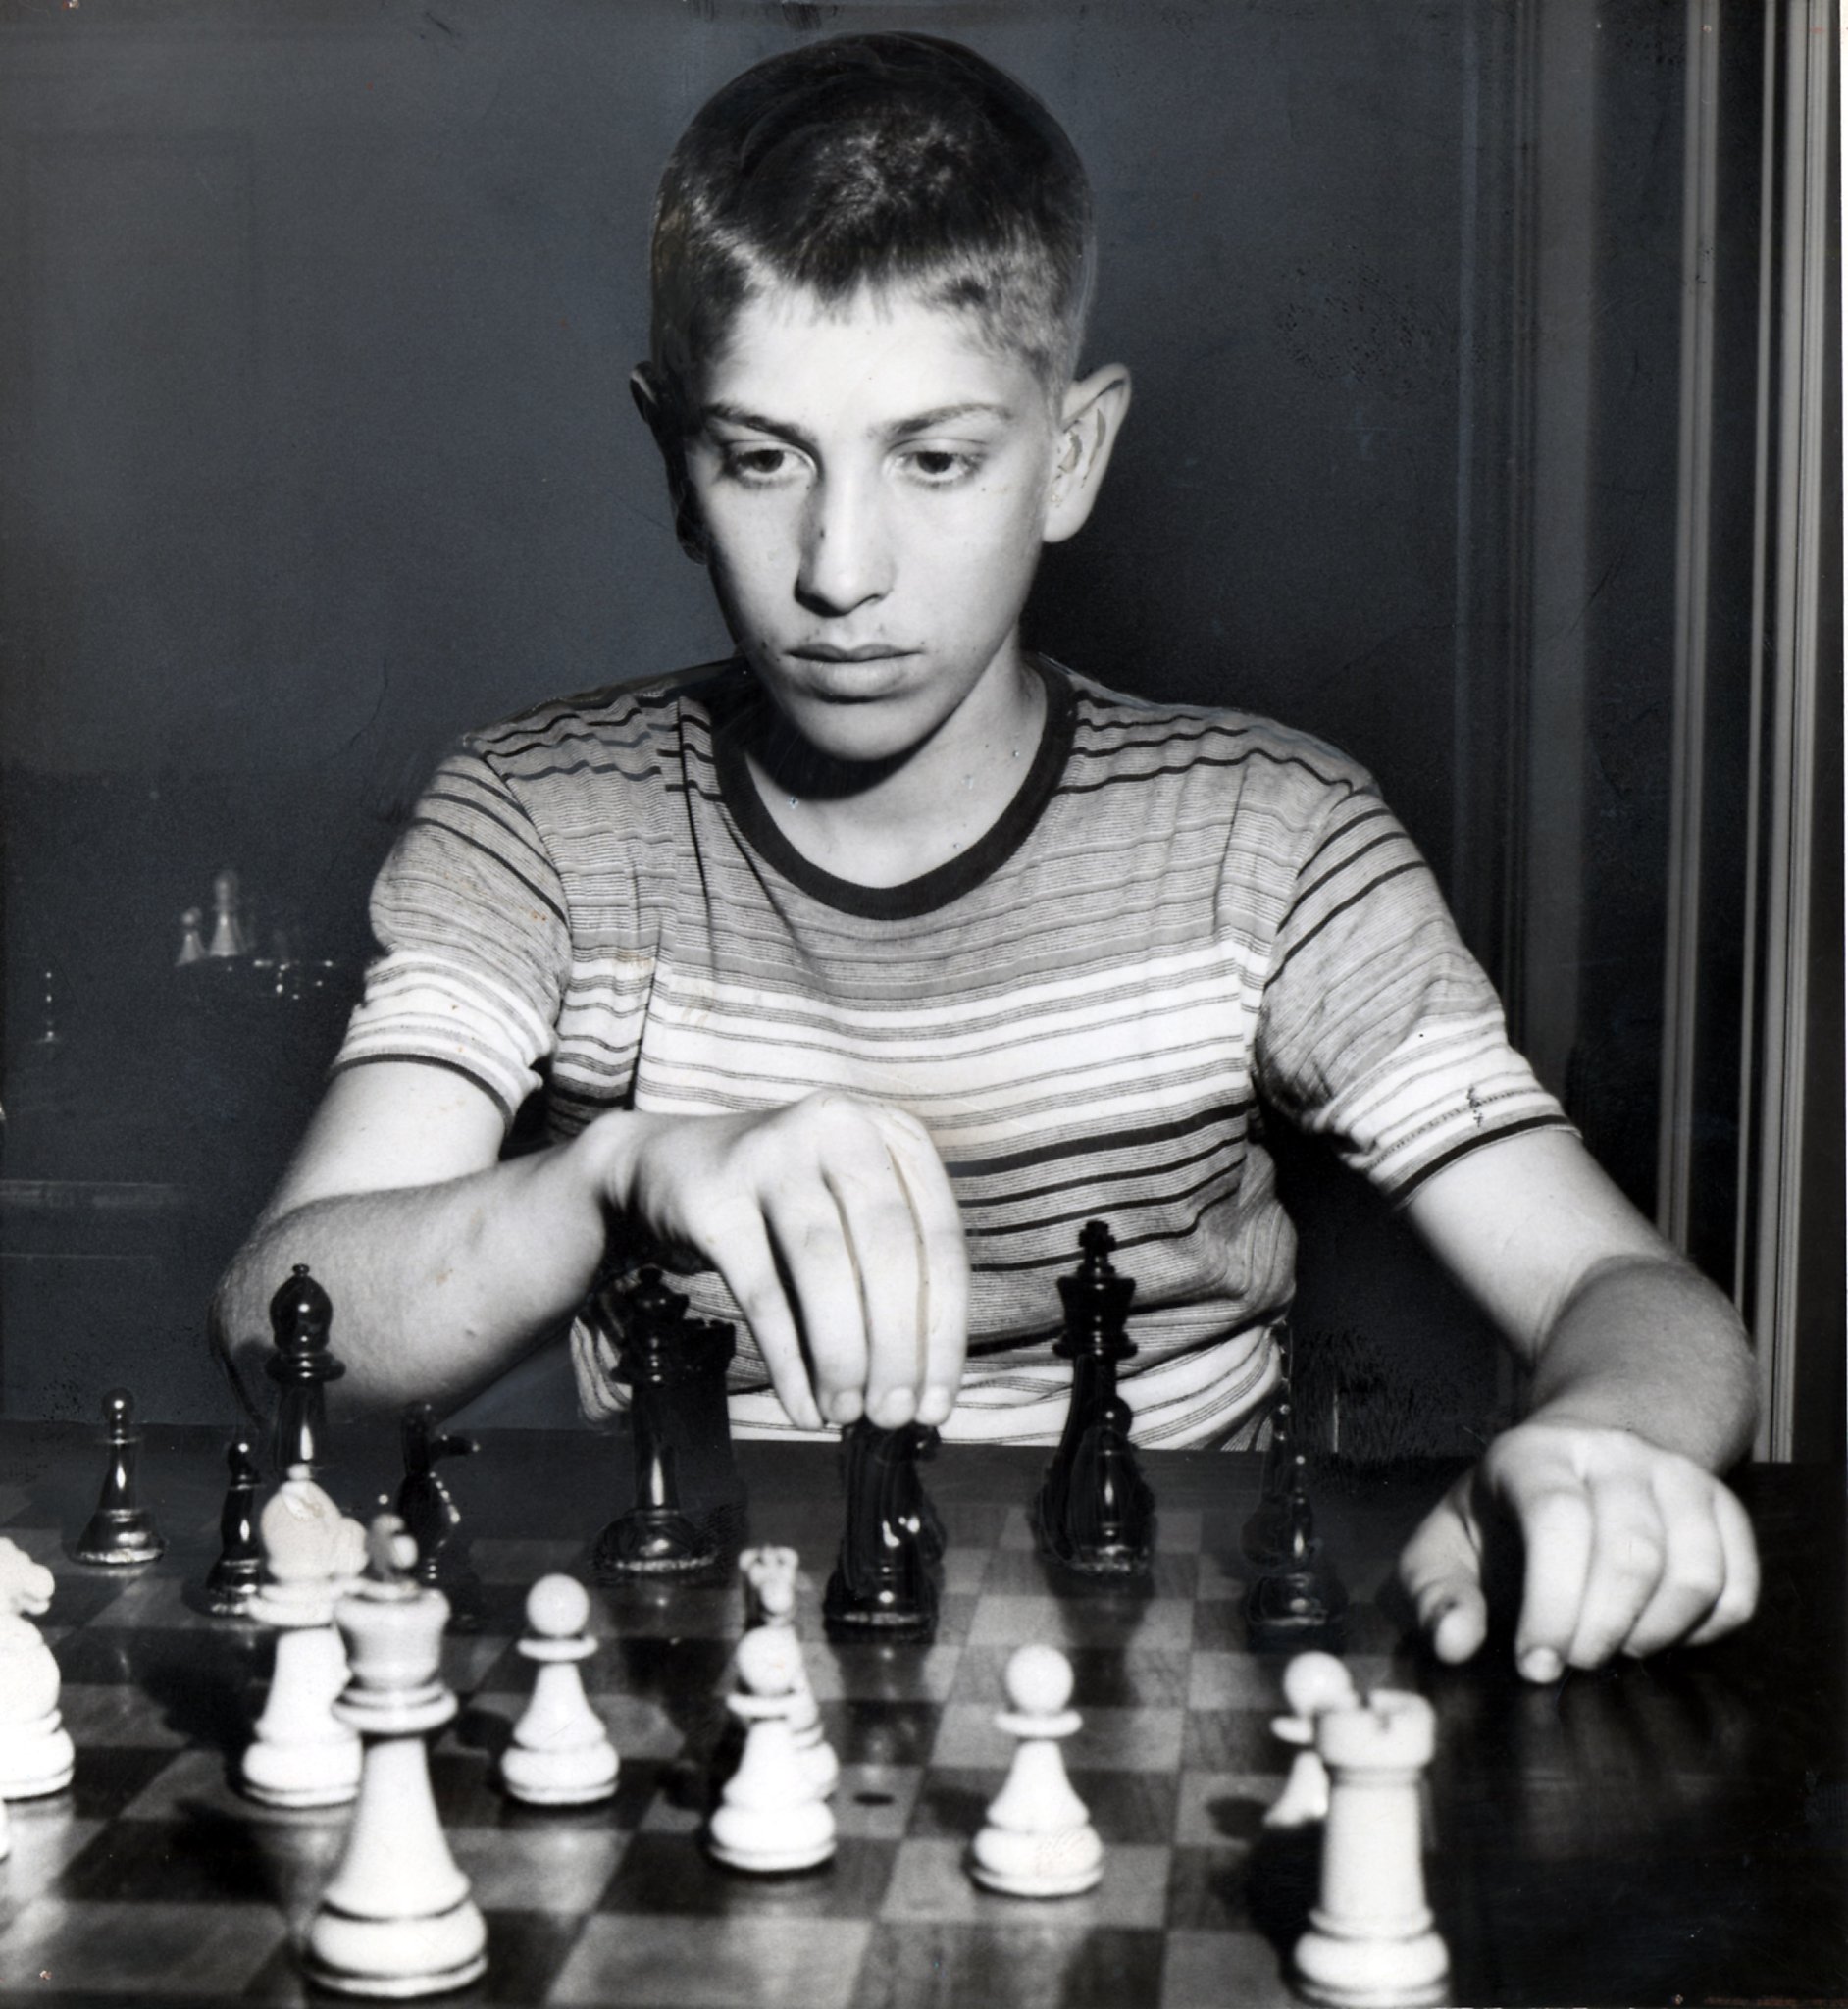 Chess genius Bobby Fischer spent his childhood in Brooklyn - SFGate